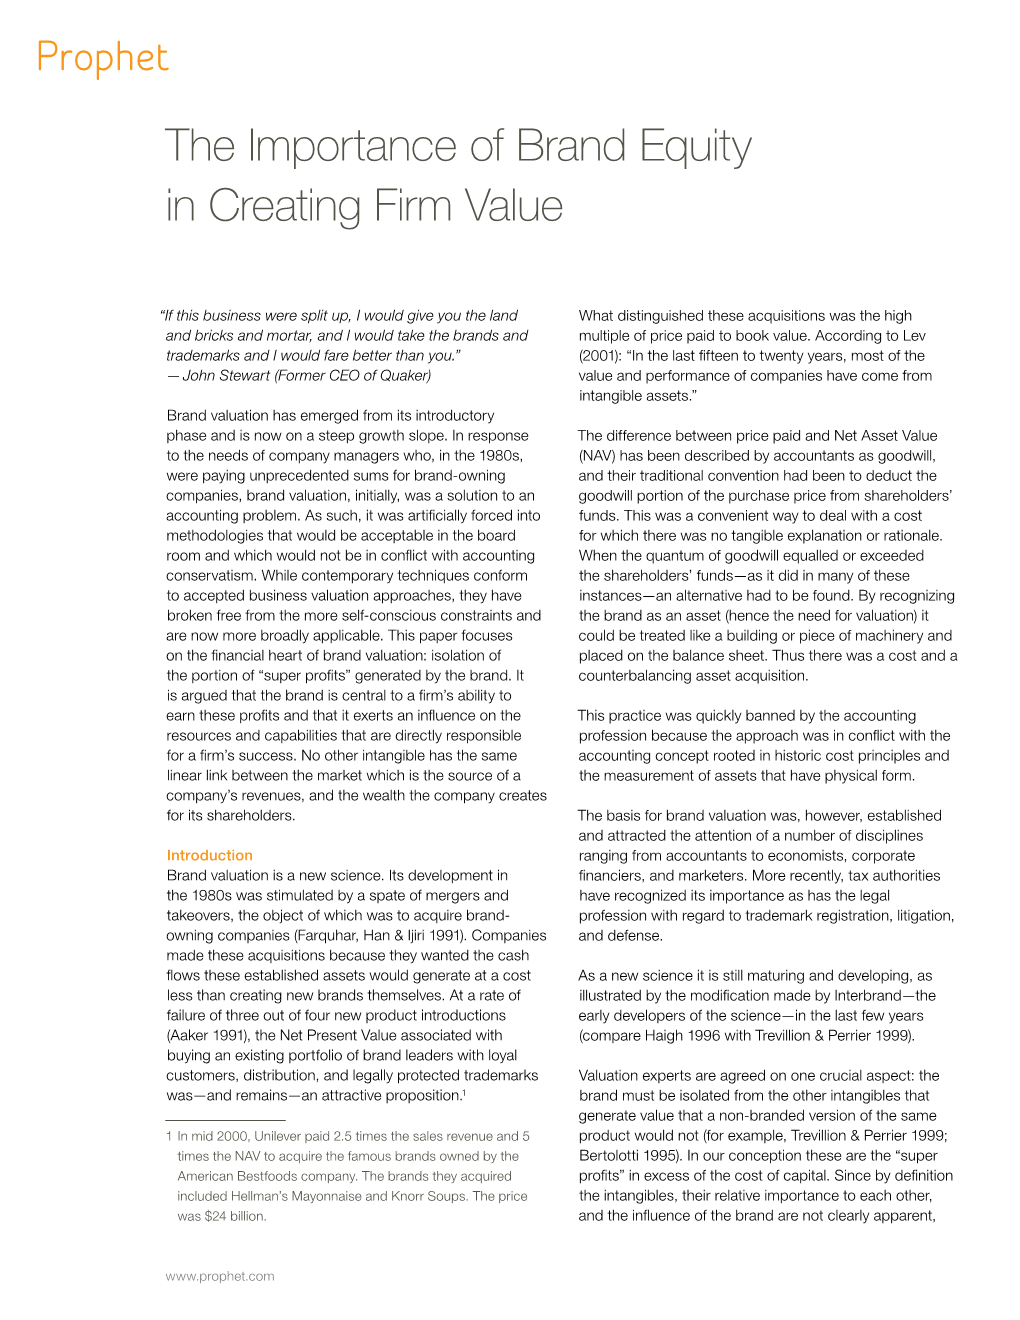 Brand Equity in Creating Firm Value